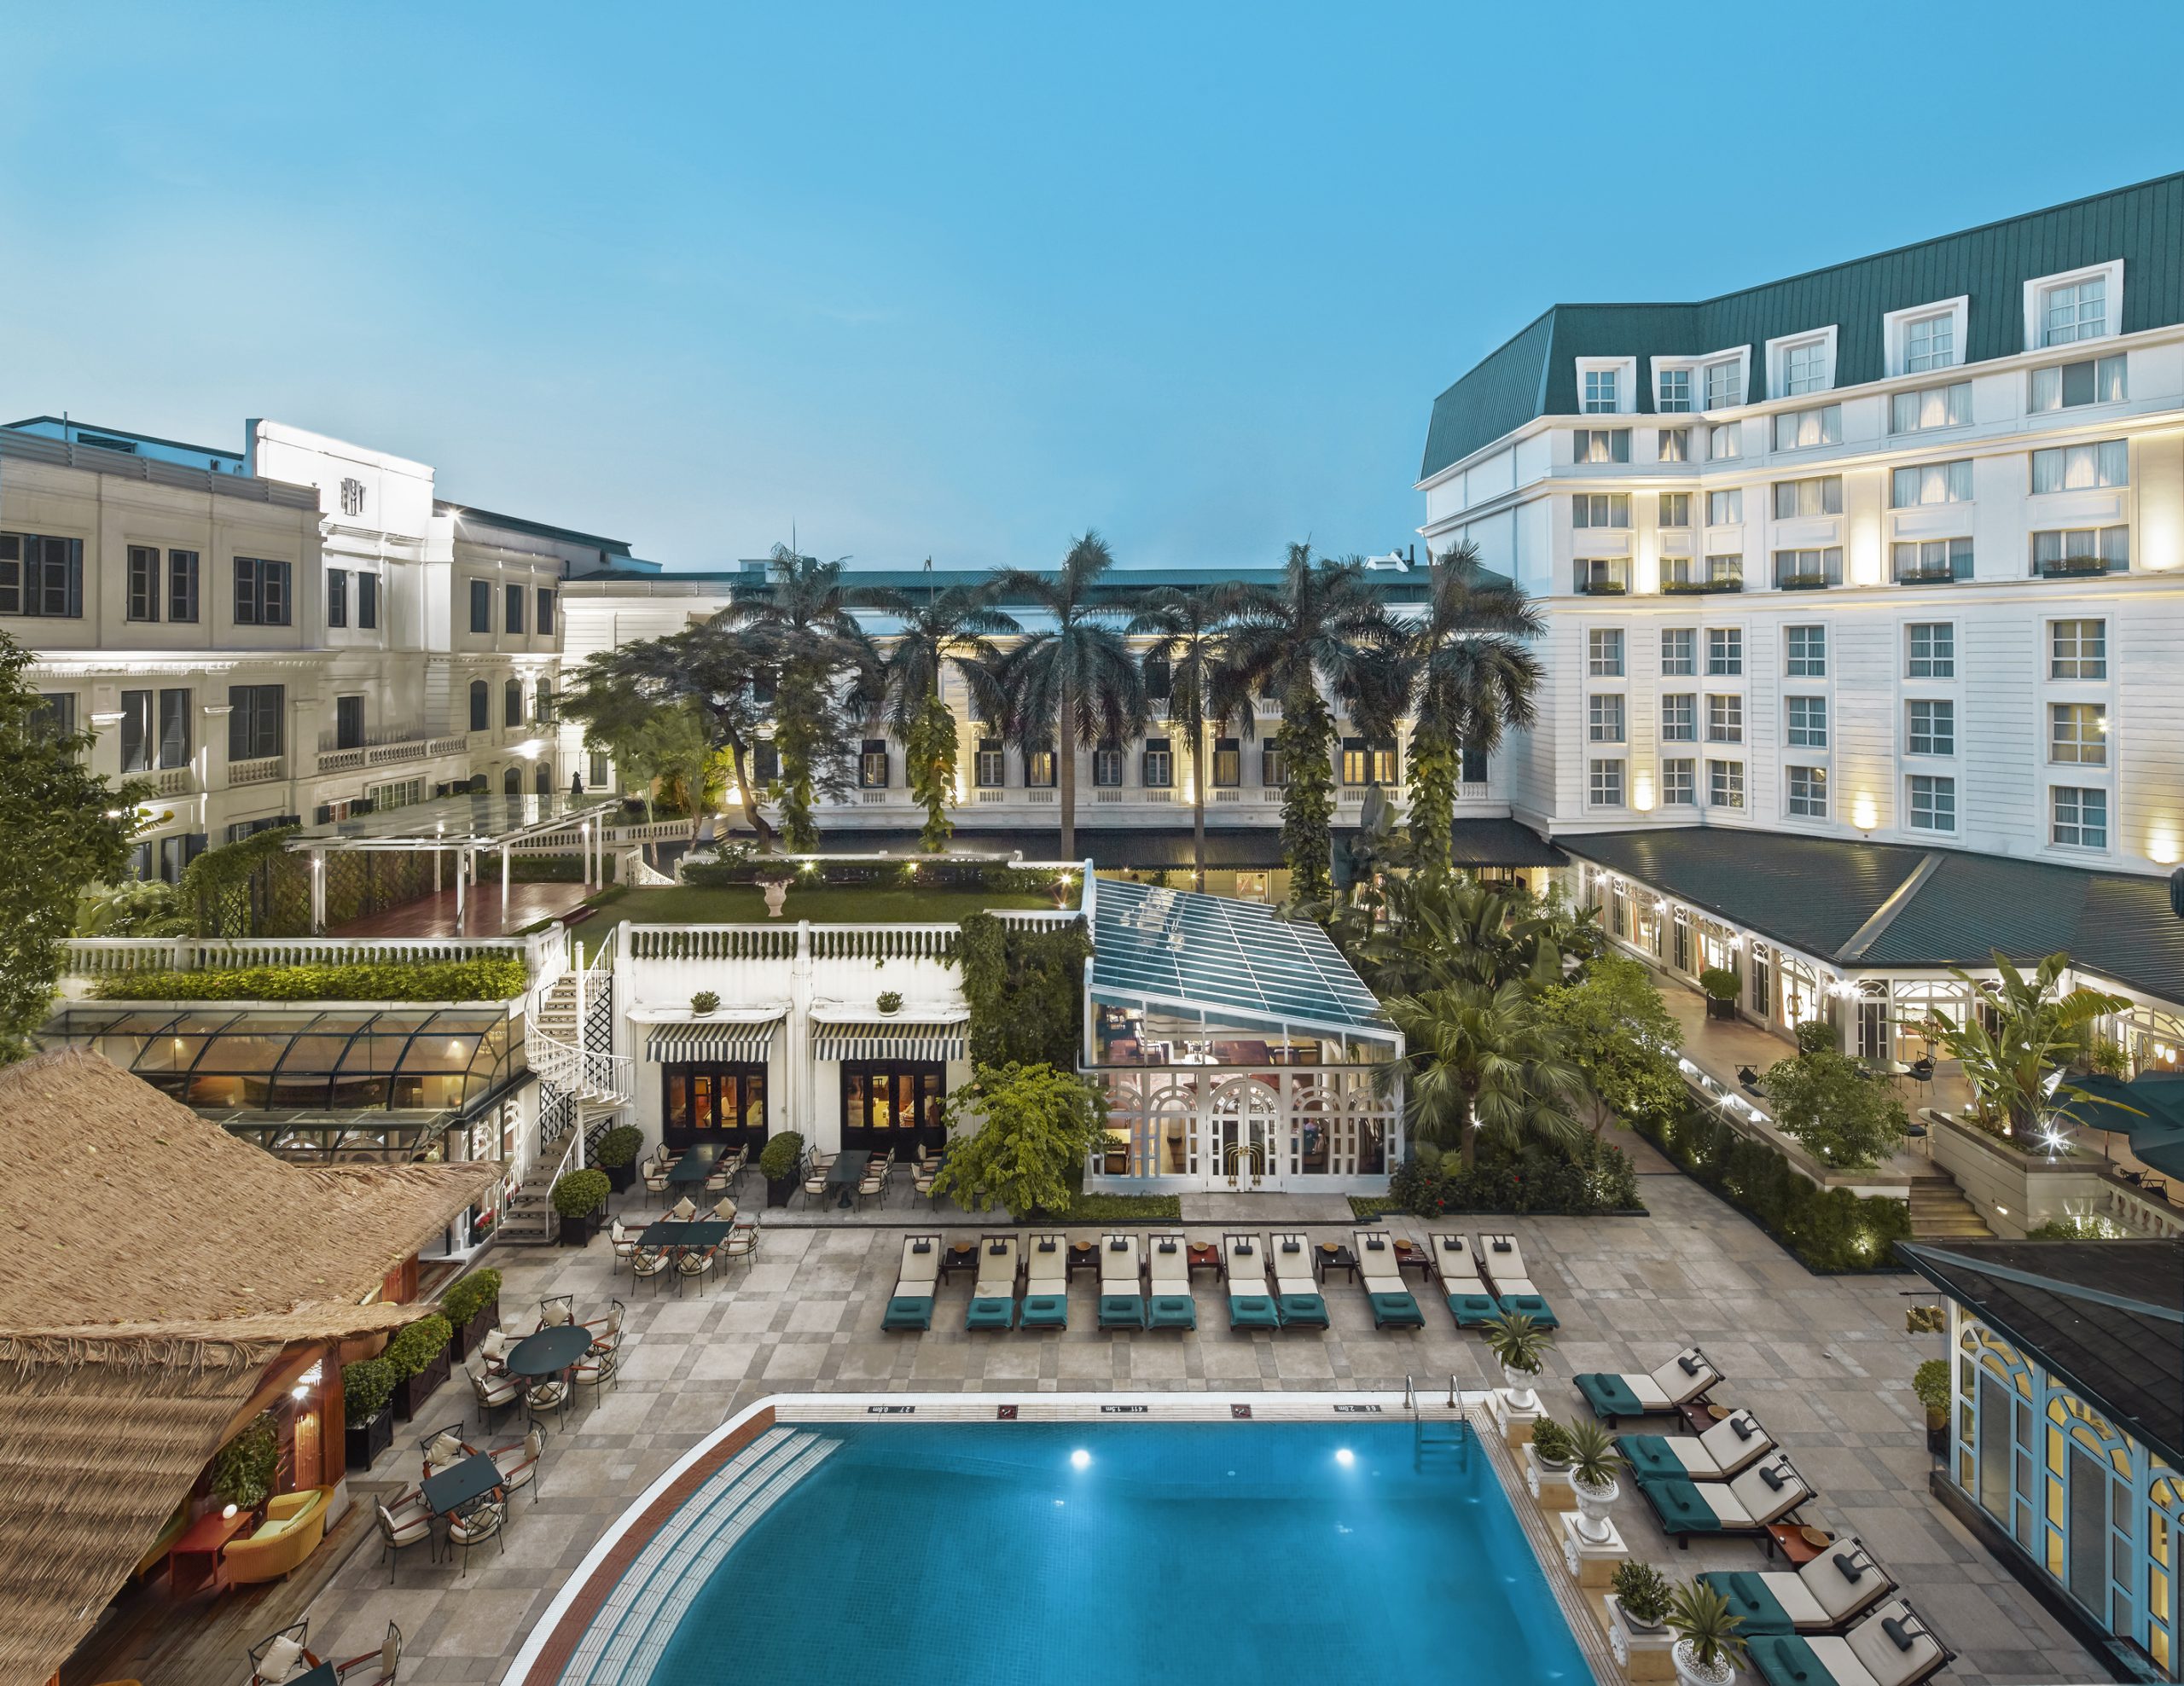 metropole-hanoi-awarded-five-stars-from-forbes-travel-guide-for-second-straight-year